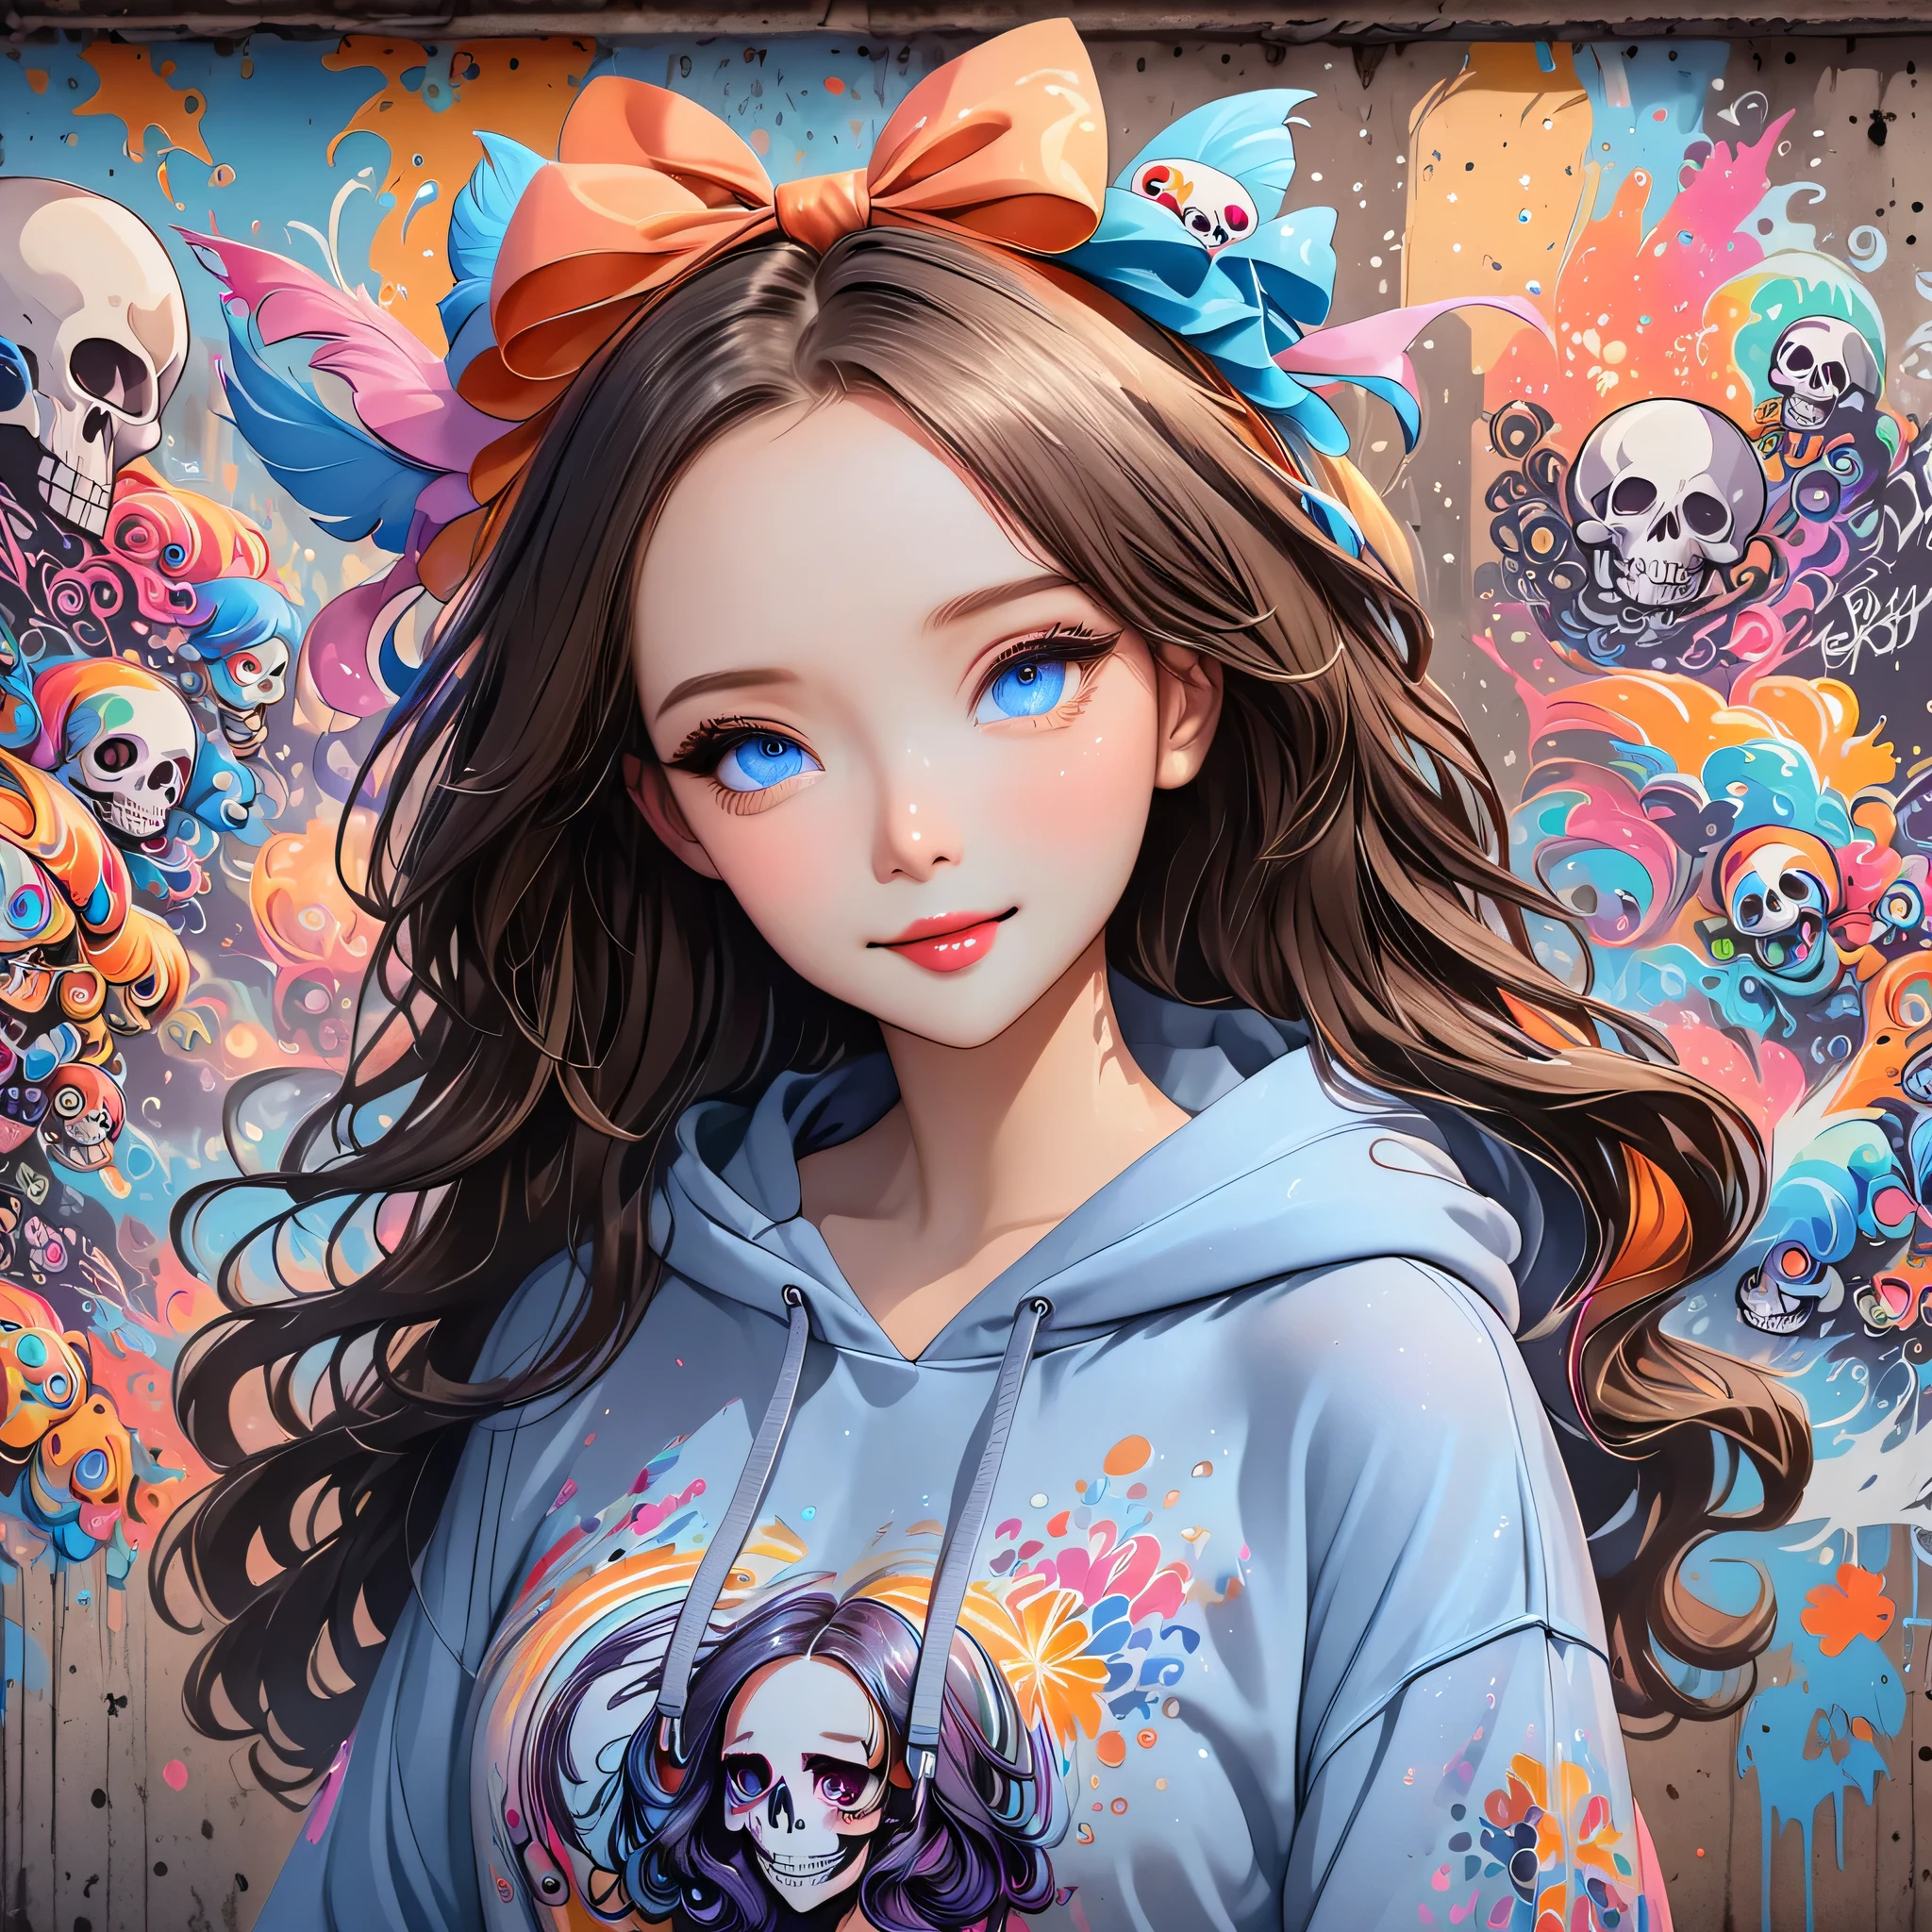 Style: Unparalleled high-precision transparent watercolor, masterpiece, super detailed, cute, Japanese animation character design,
smile


She has light blue eyes and long hair that flutters in the wind.
Beautiful girl wears ribbons in her hair, skull hoodie, short jeans, and boots,
Graffiti on the wall
Scene is colorful and dark 
General view